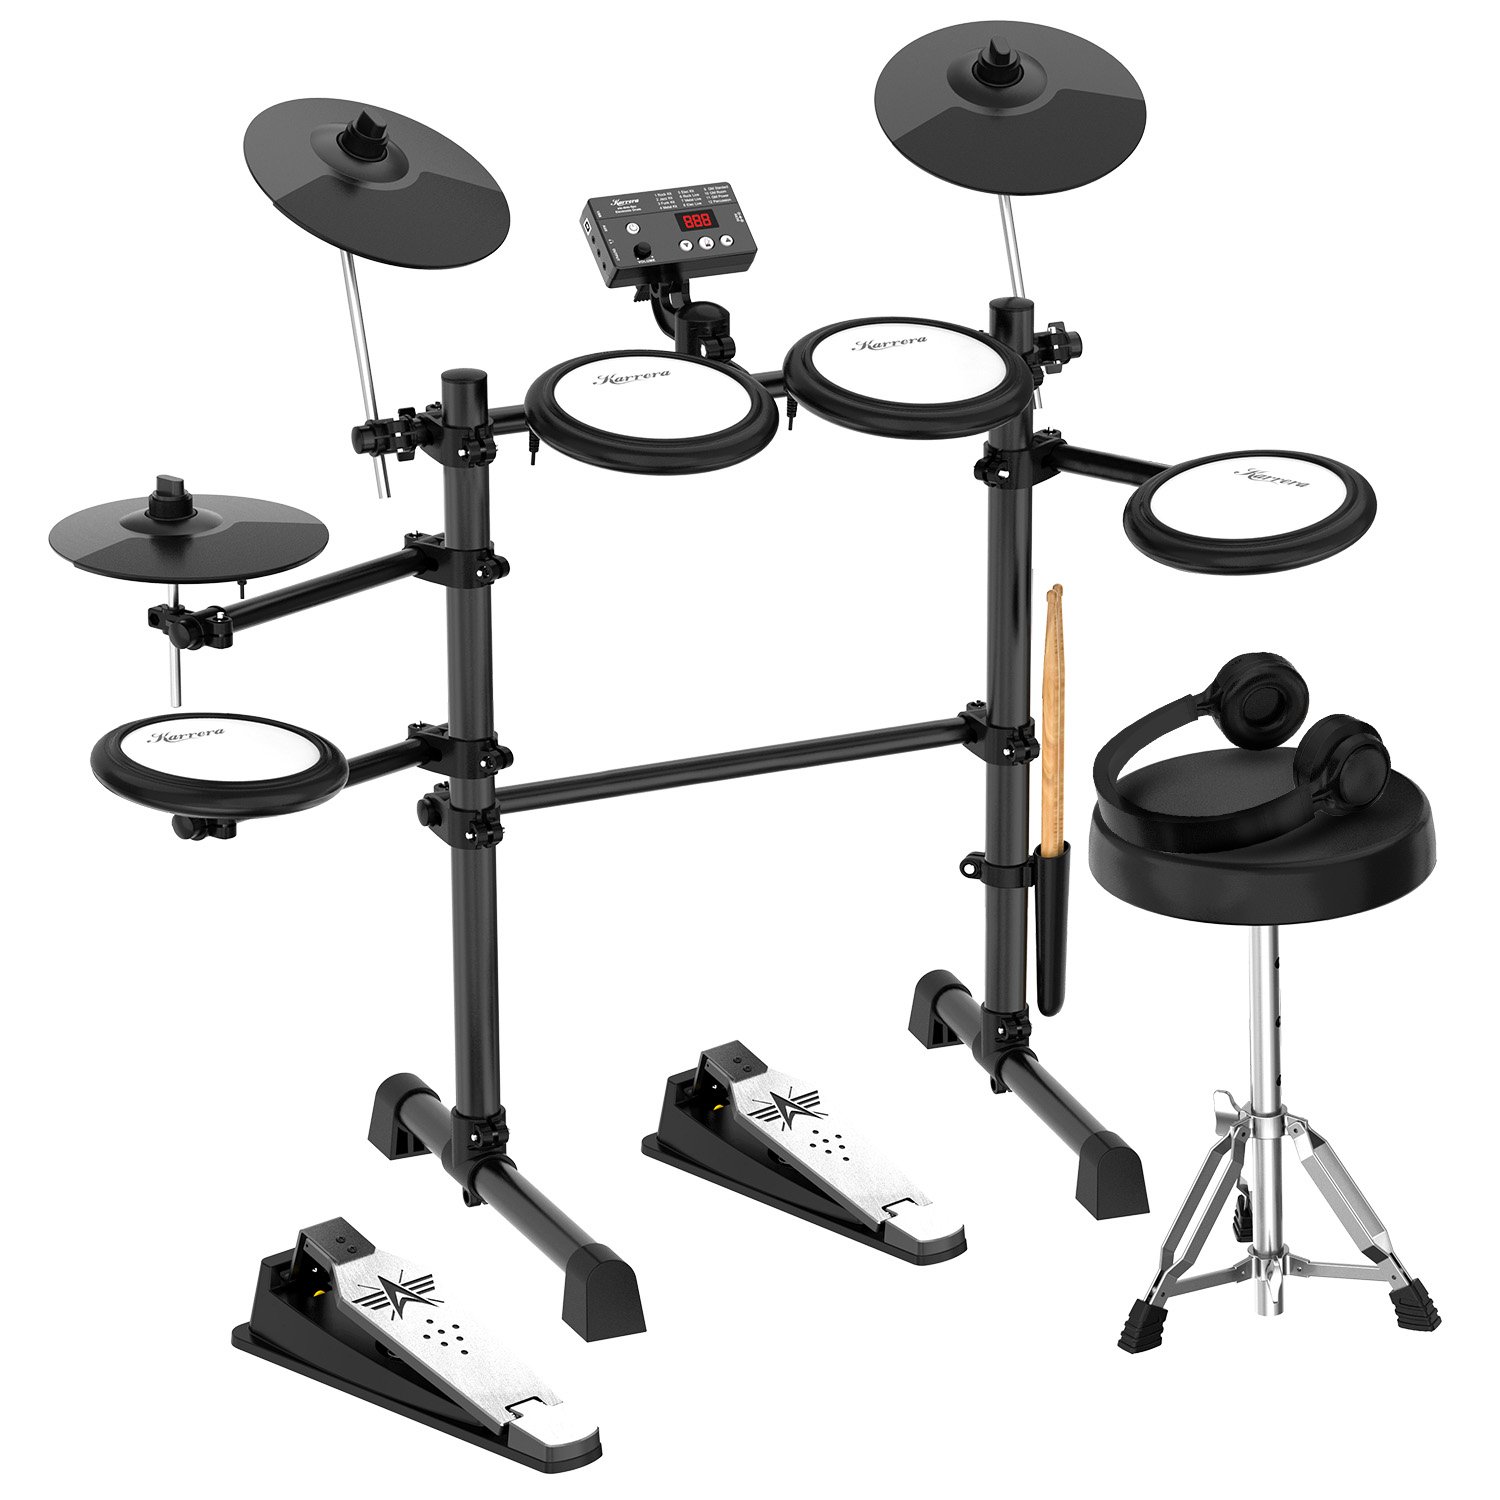 Karrera TDX-16 Electronic Drum Kit with Pedals 2